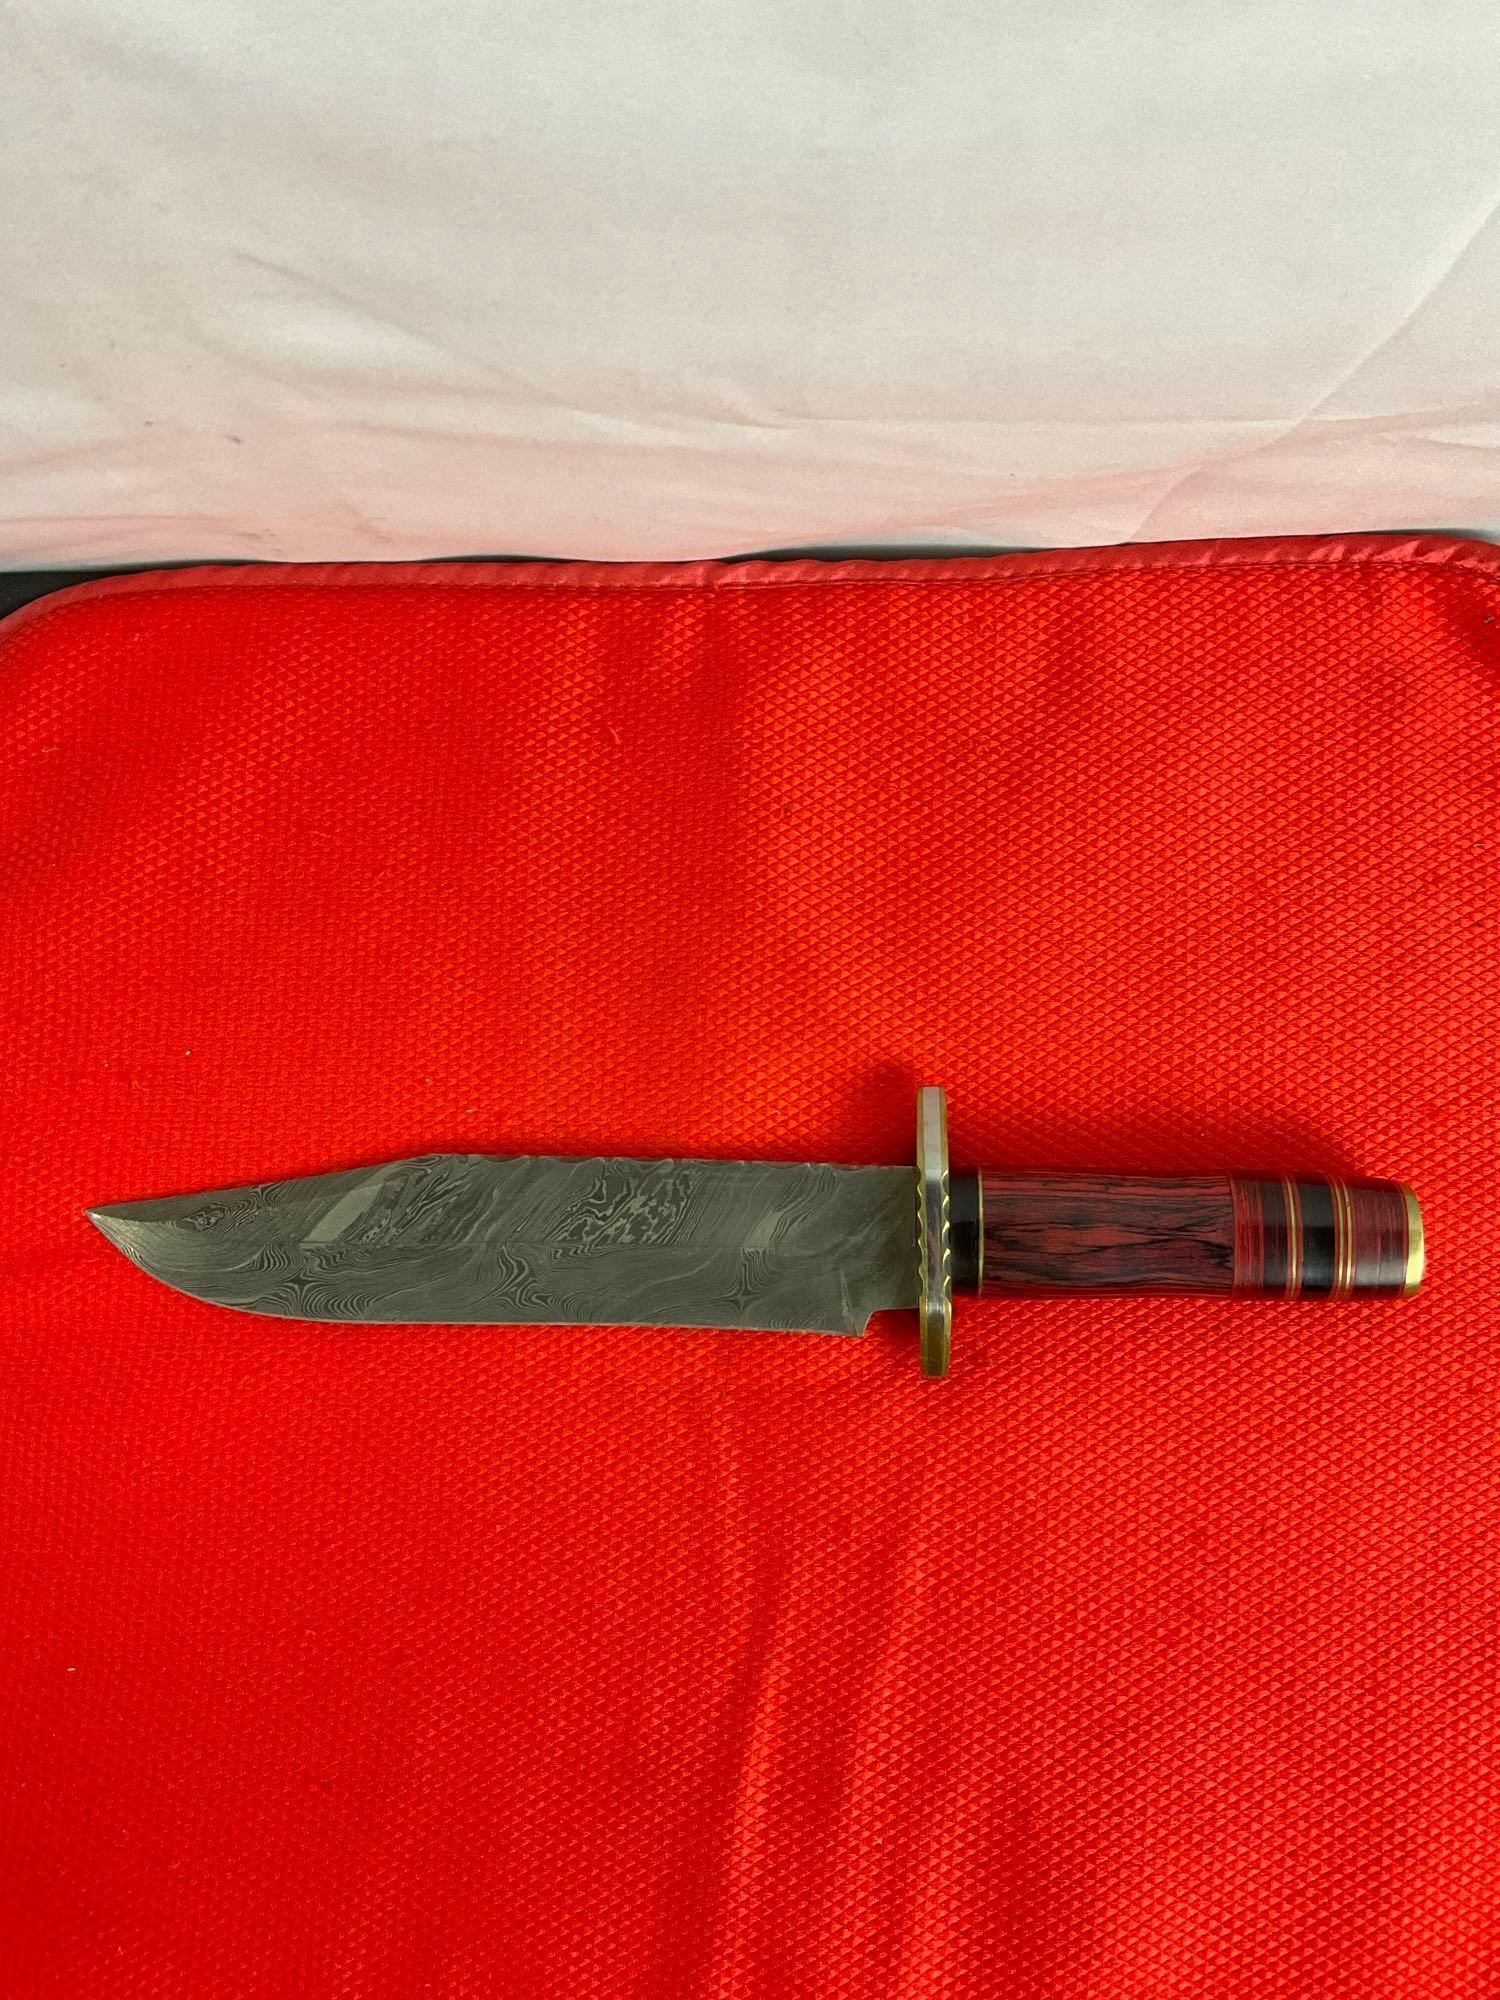 8" Steel Fixed Blade Bowie Knife w/ Etched Blade, Wooden Handle & Embossed Leather Sheath. NIB. See